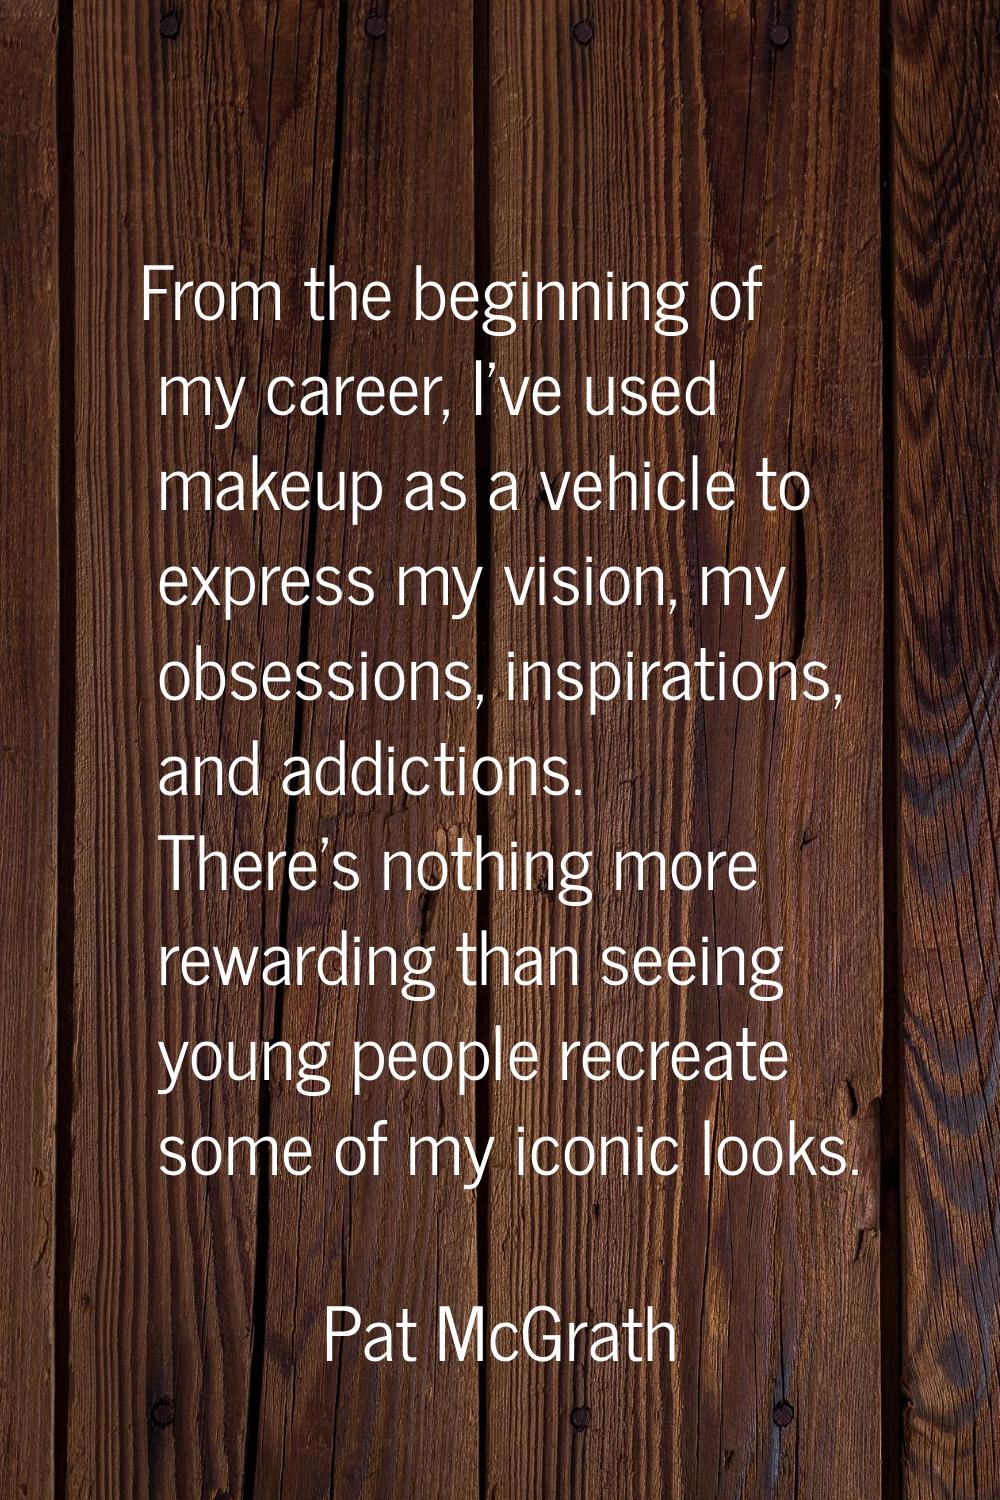 From the beginning of my career, I've used makeup as a vehicle to express my vision, my obsessions,